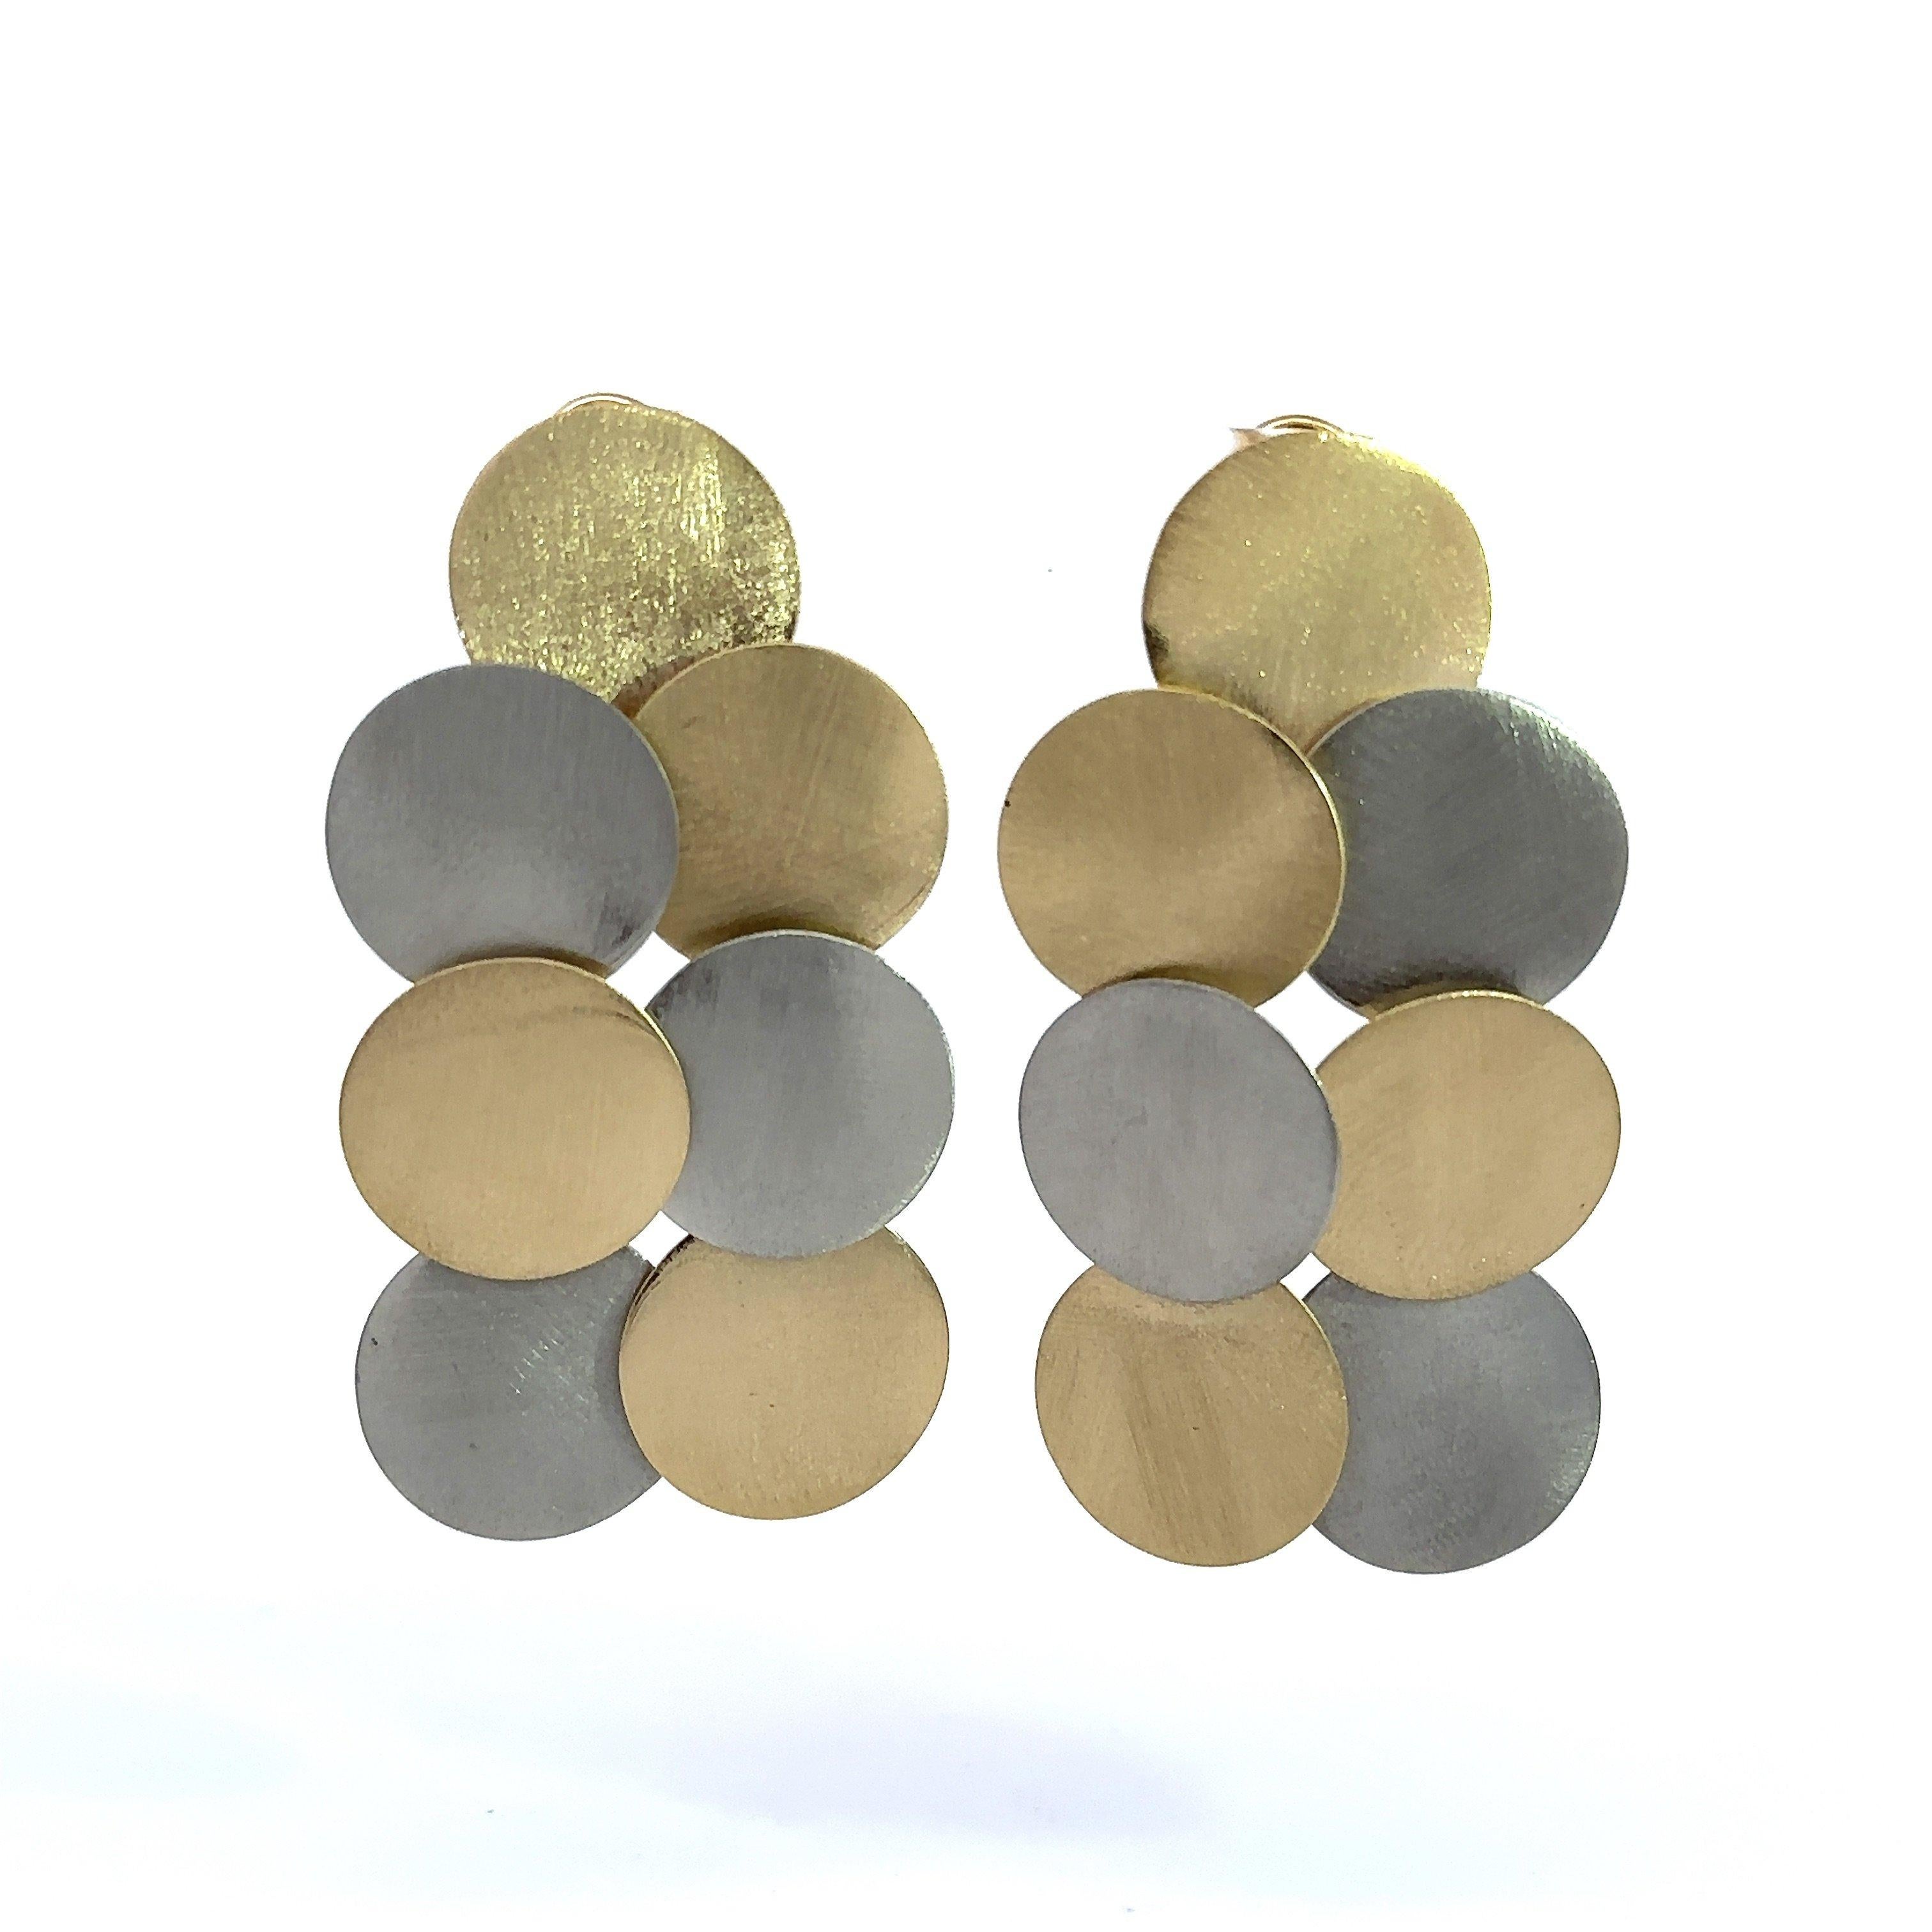 Garavelli 18KT brushed yellow gold, and 18KT brushed white gold cascading disc earrings with lever back closures. The earrings measure approximately 2.25